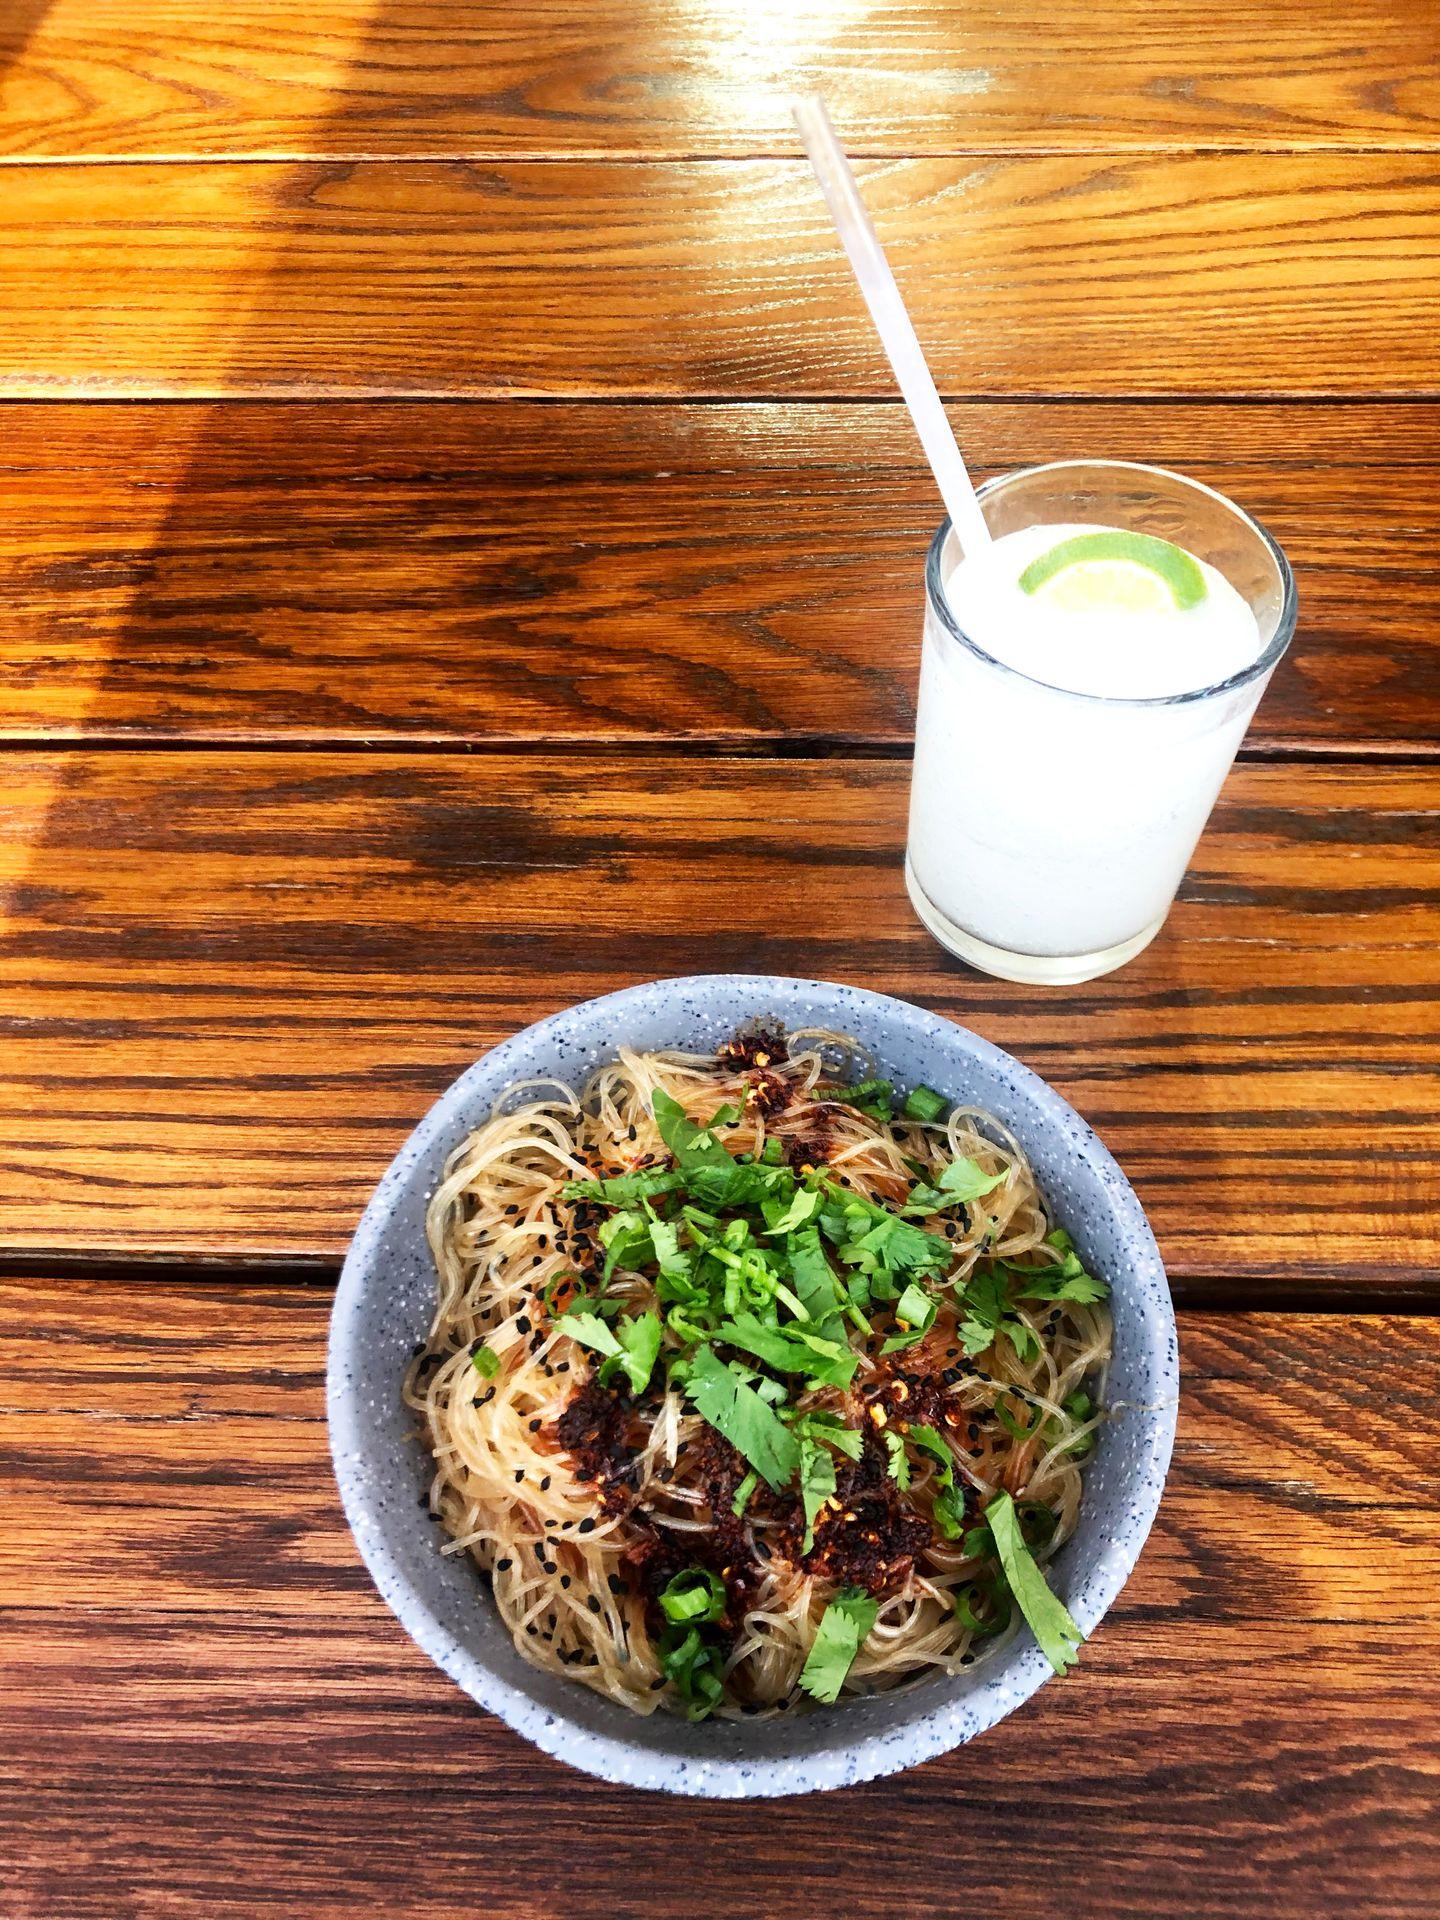 A noodle bowl and margarita from Loro.